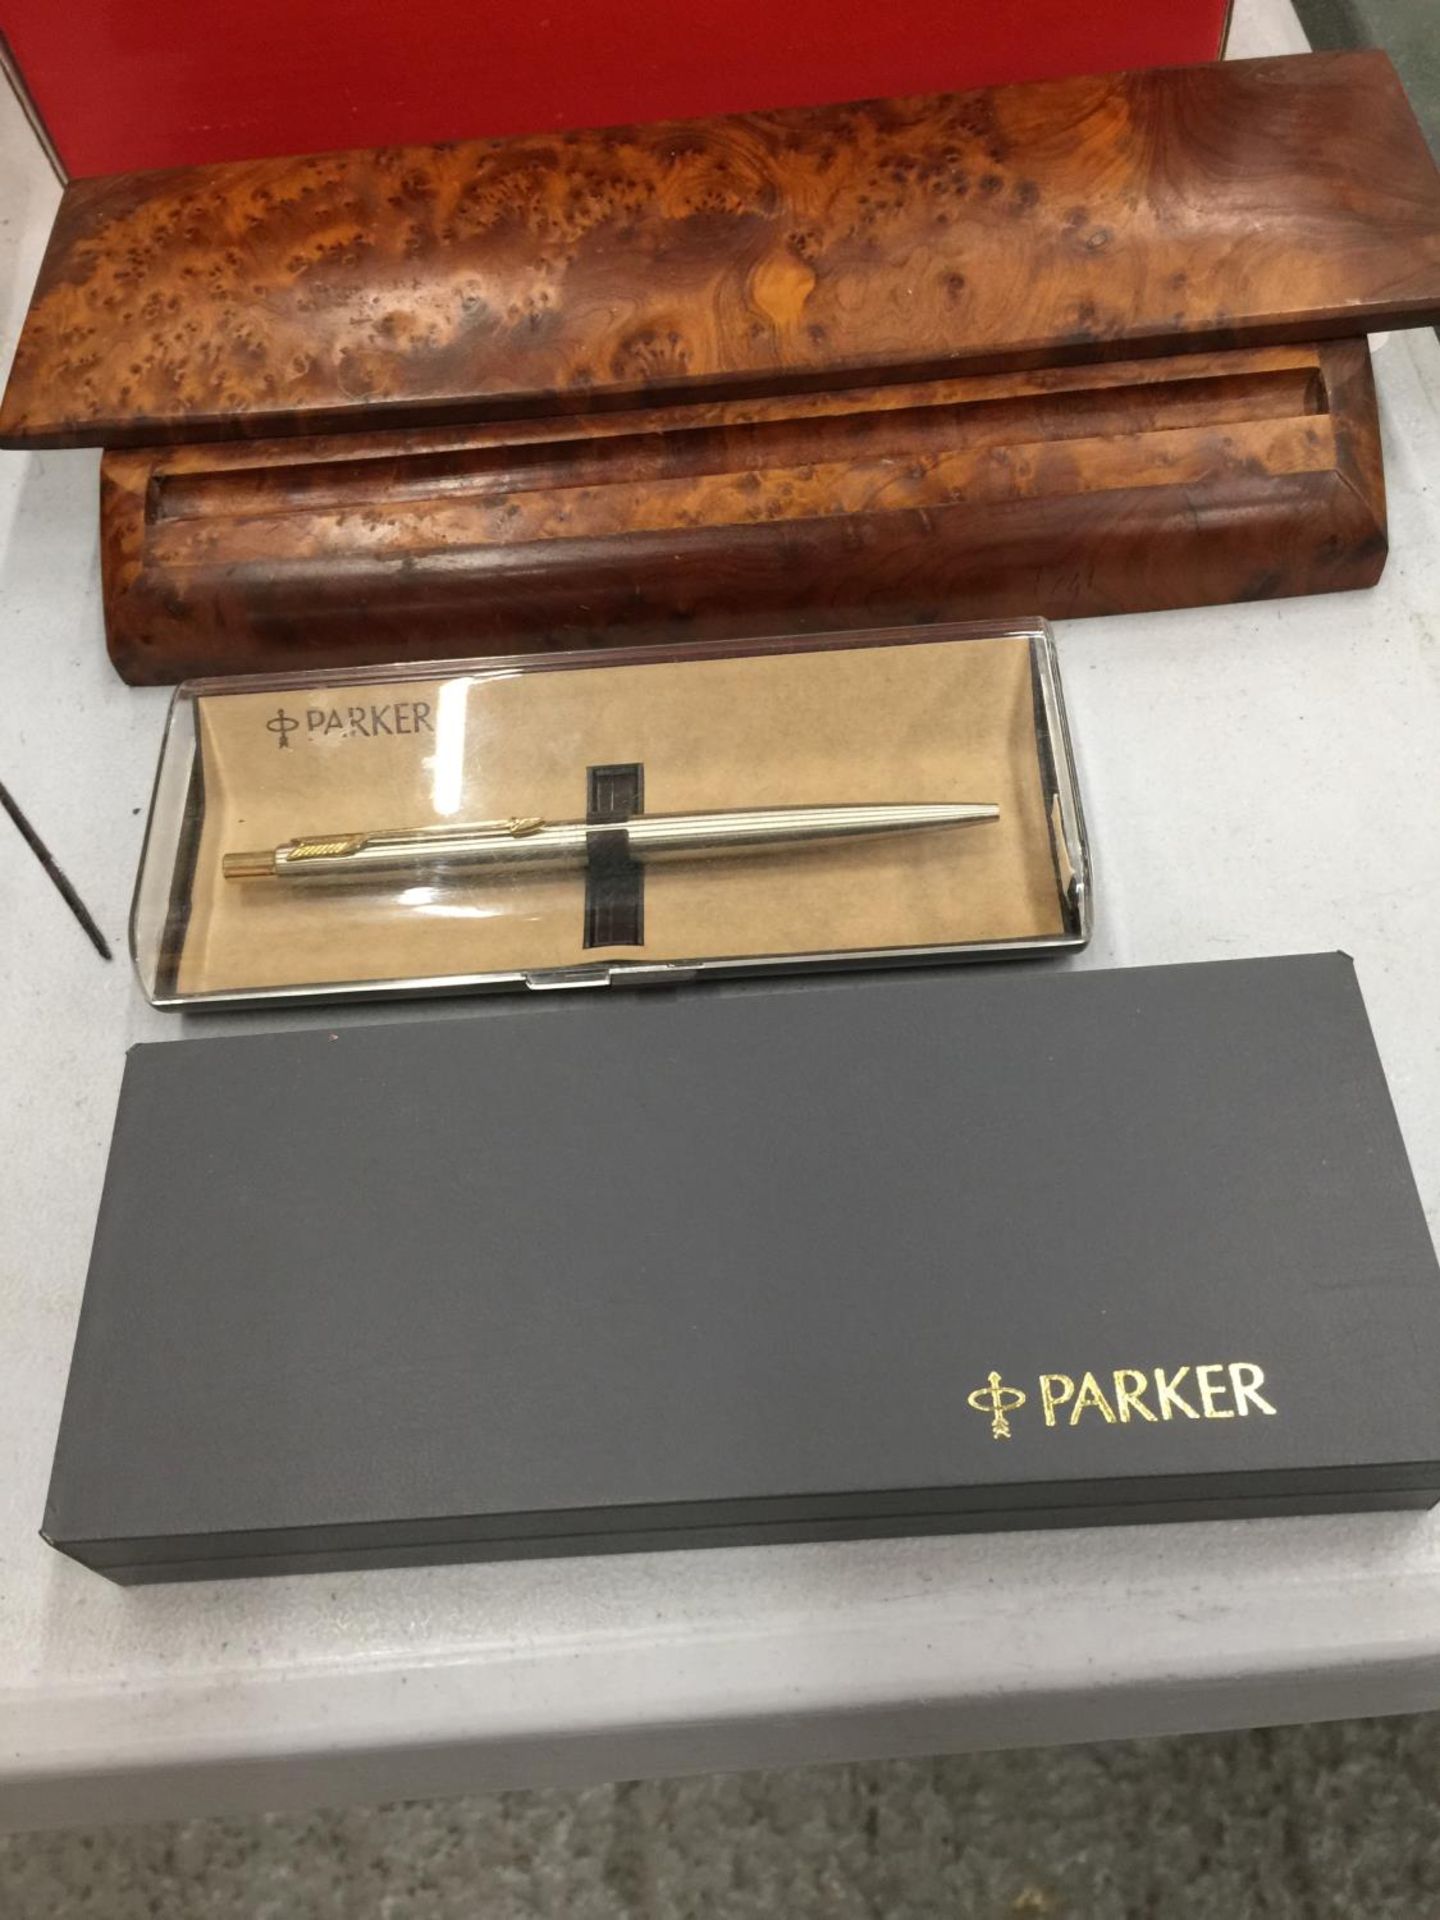 A BOXED PARKER FOUNTAIN PEN WITH A 14CT GOLD NIB, A BOXED PARKER BALLPOINT PEN AND A BURR WALNUT